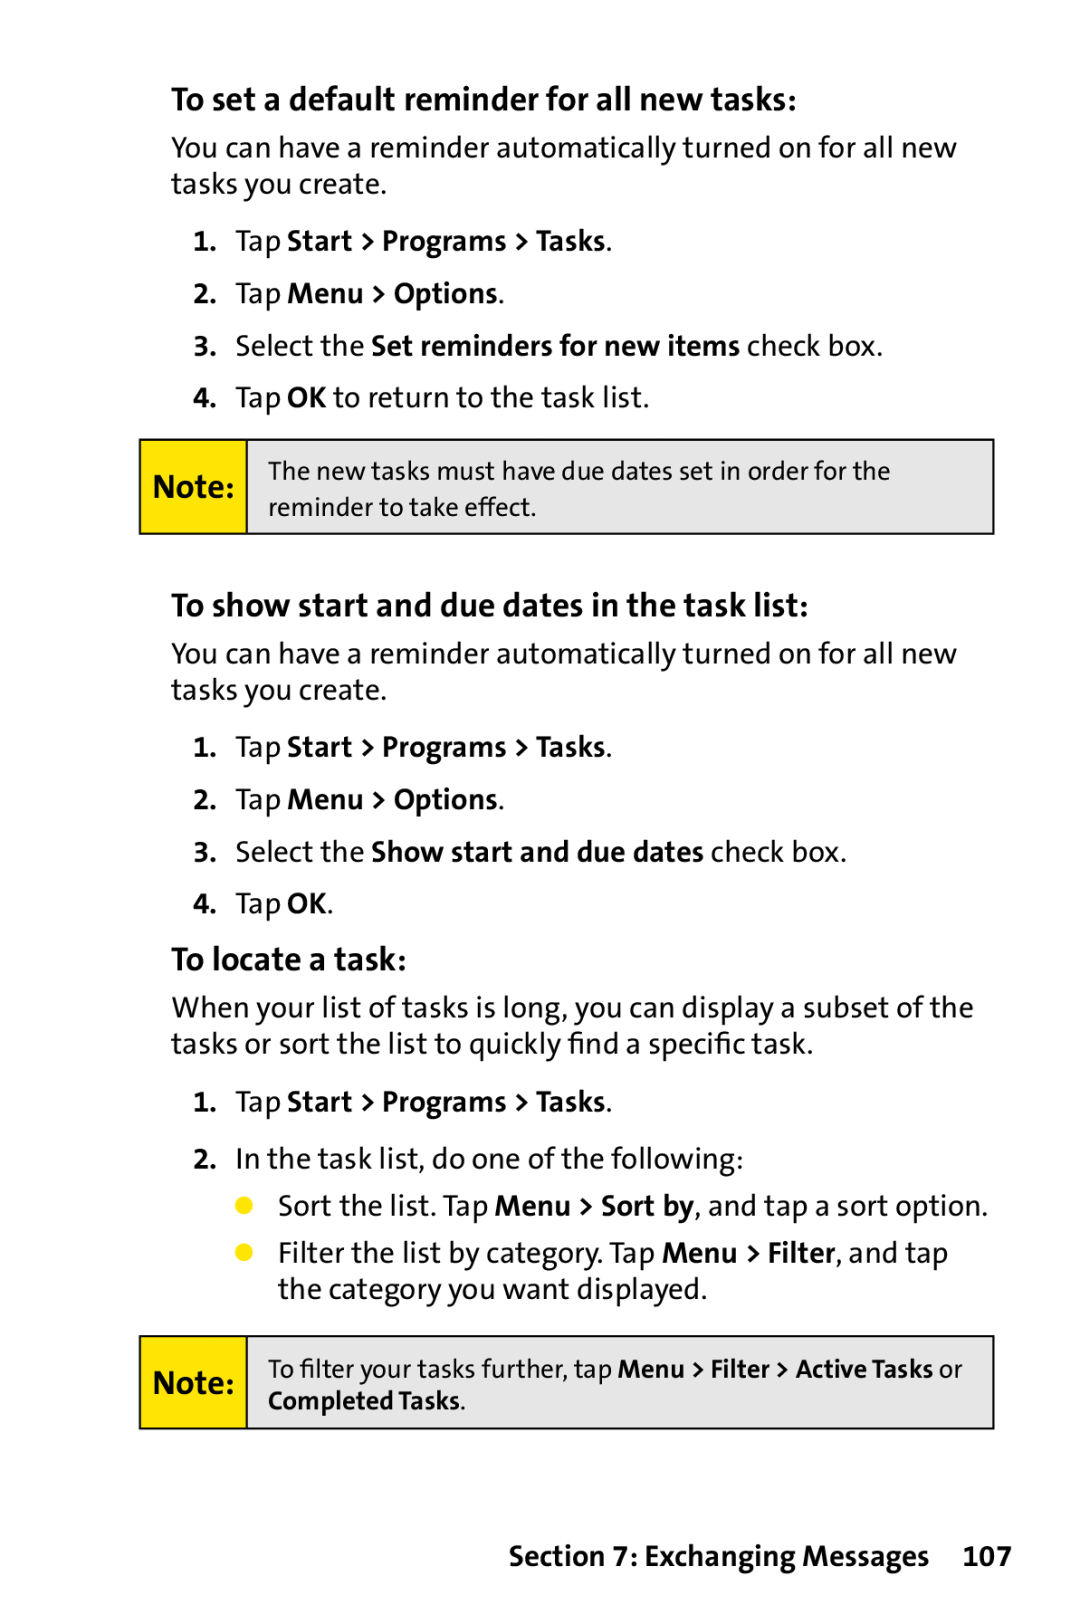 Sprint Nextel PPC-6700 manual To set a default reminder for all new tasks, To show start and due dates in the task list 